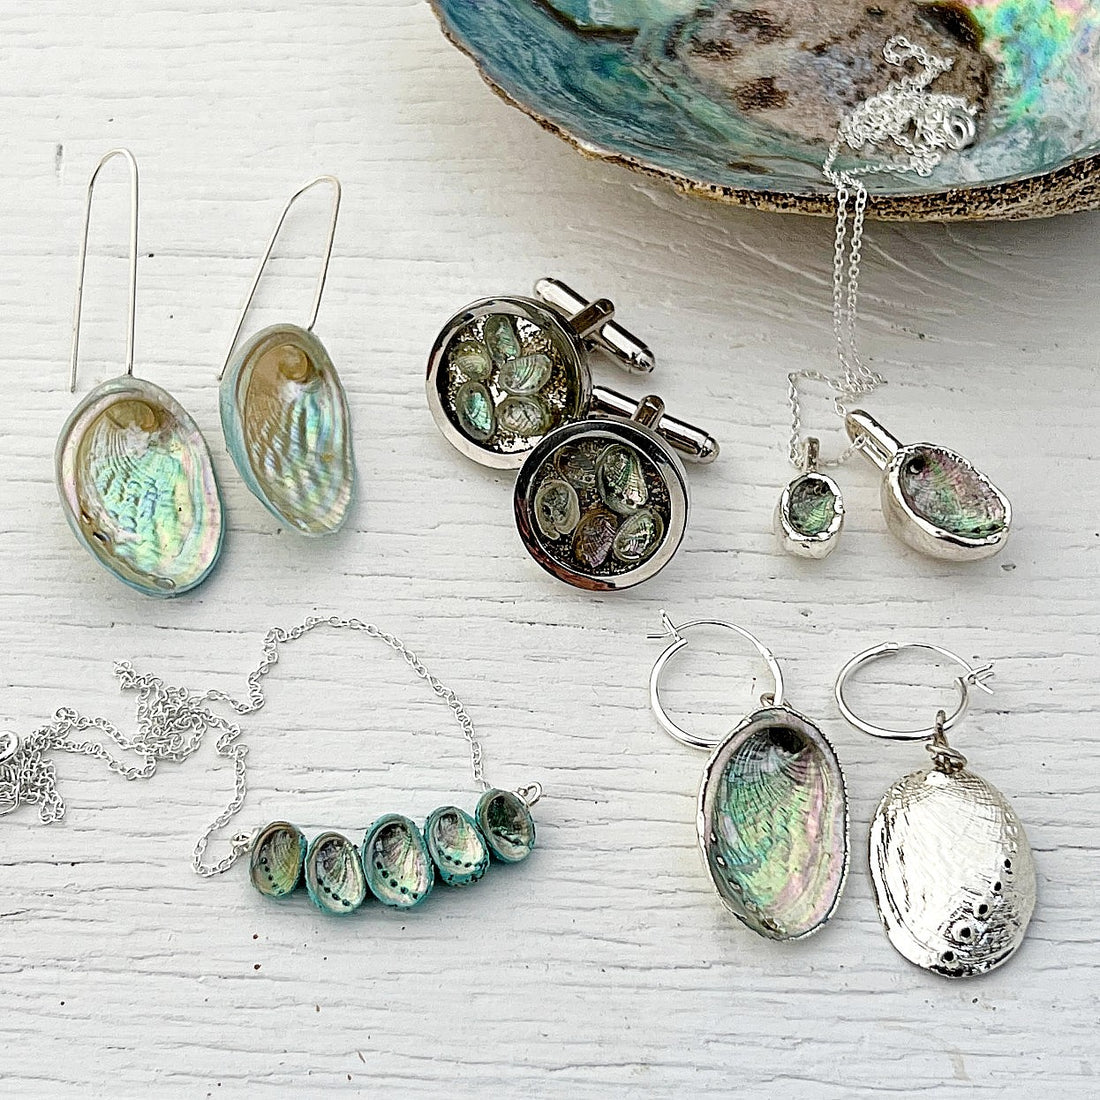 Which of these paua shell pieces is your favourite?